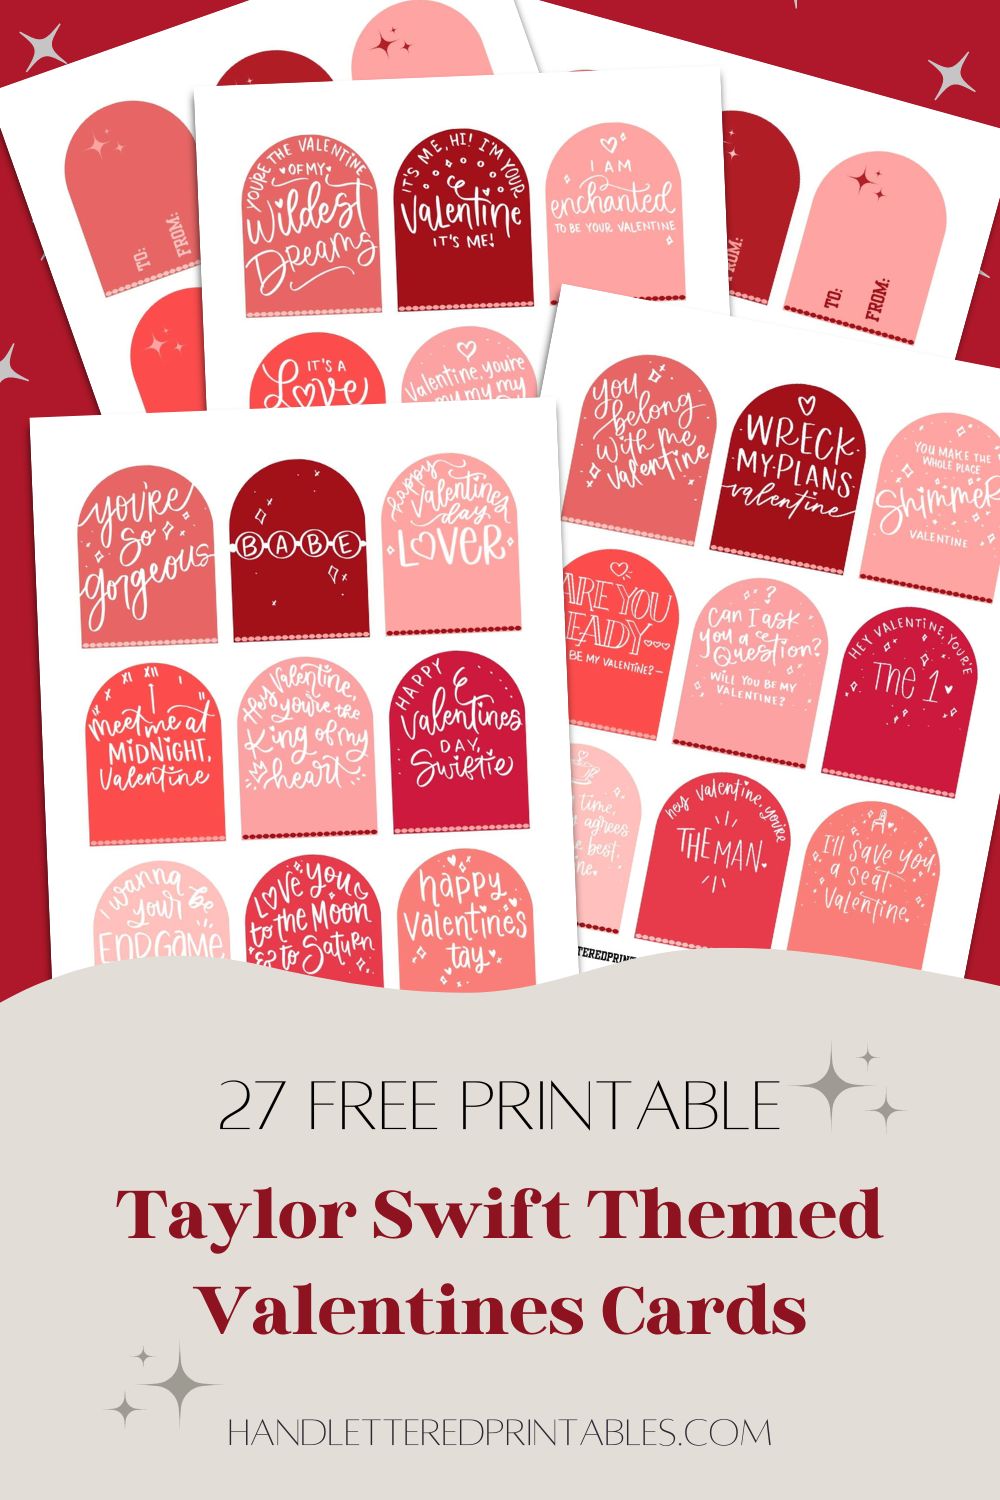 text reads: 27 free printable taylor swift themed valentines cards image shows all 27 free printable taylor swift valentines cards, full sheets not cut to size on red background